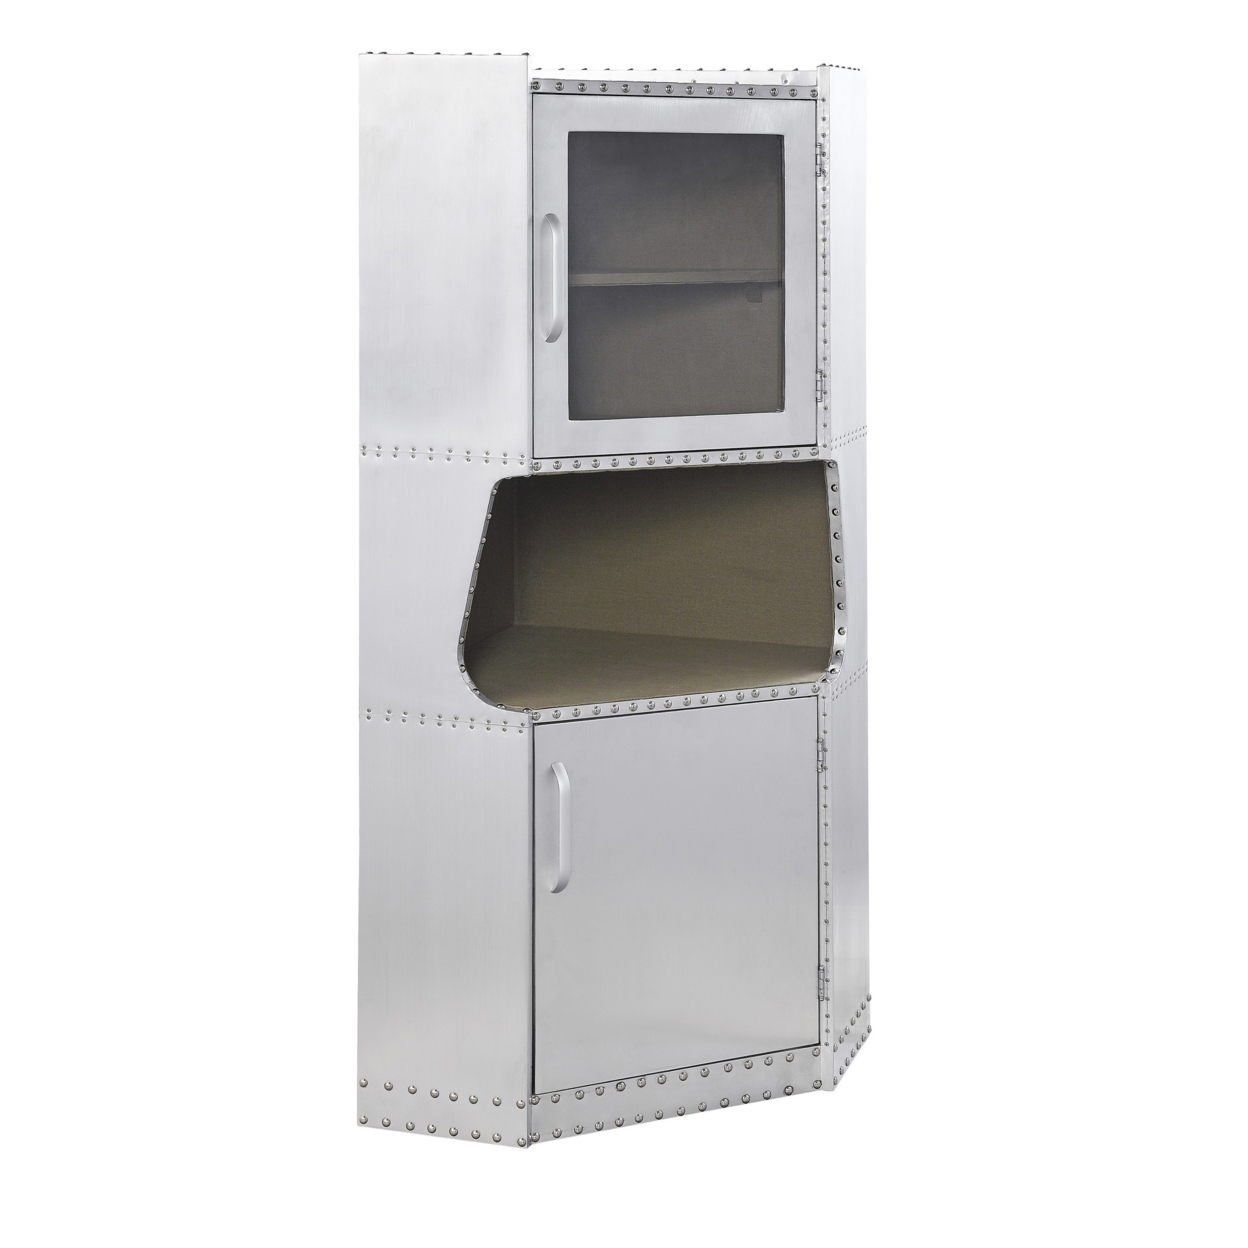 2 Door Aluminum Cabinet With Open Compartment And Rivet Accents, Silver- Saltoro Sherpi